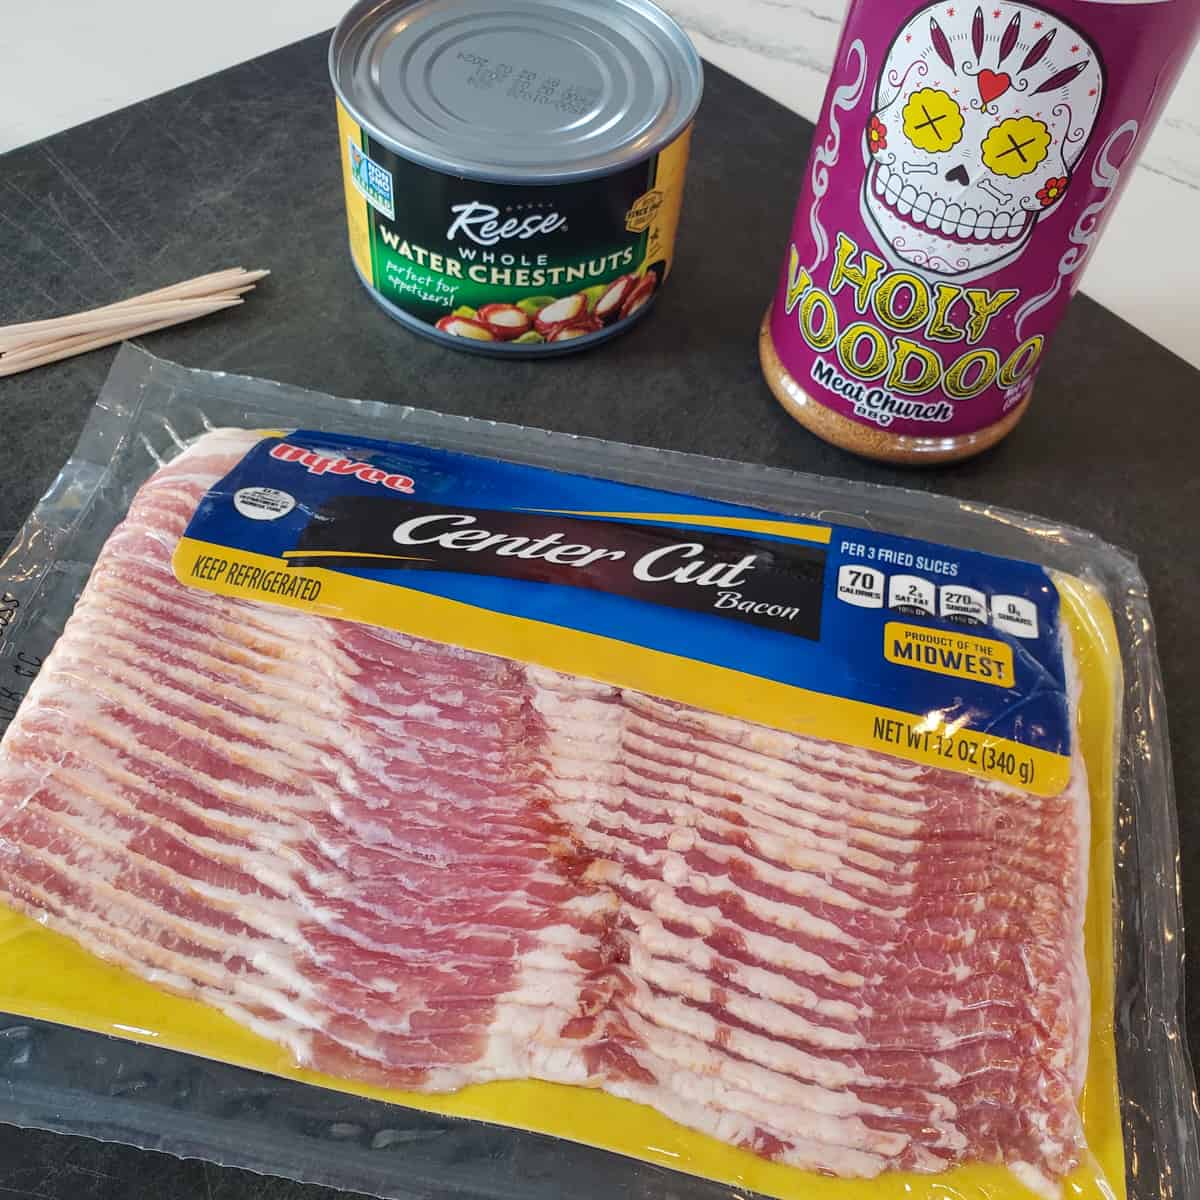 Bacon, BBQ seasoning and water chestnuts on a cutting board.